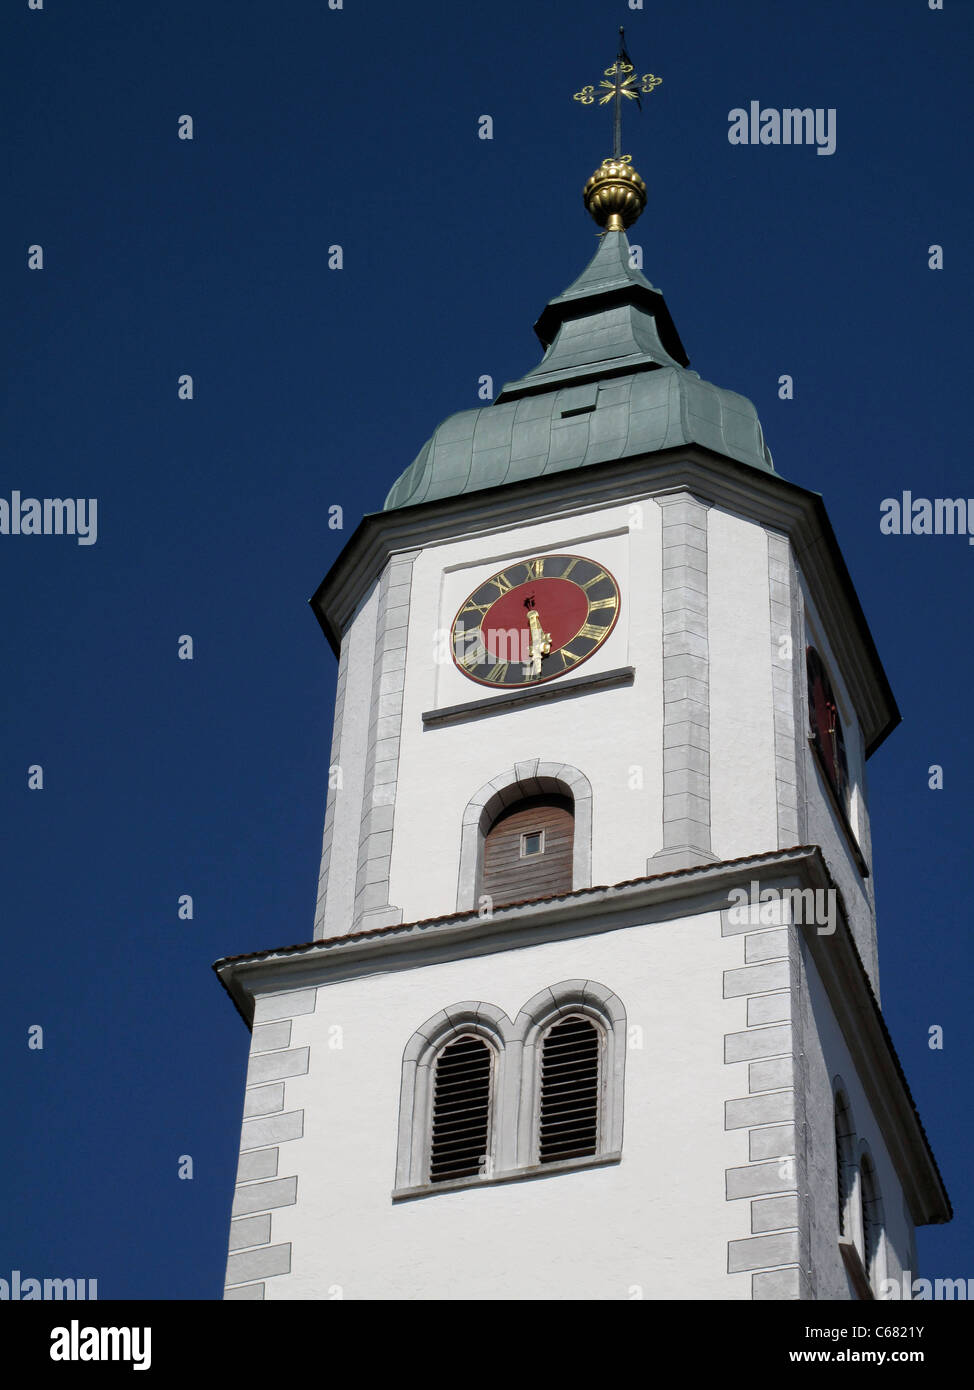 Tower of Catholic church in Bad Wurzach, Germany Stock Photo